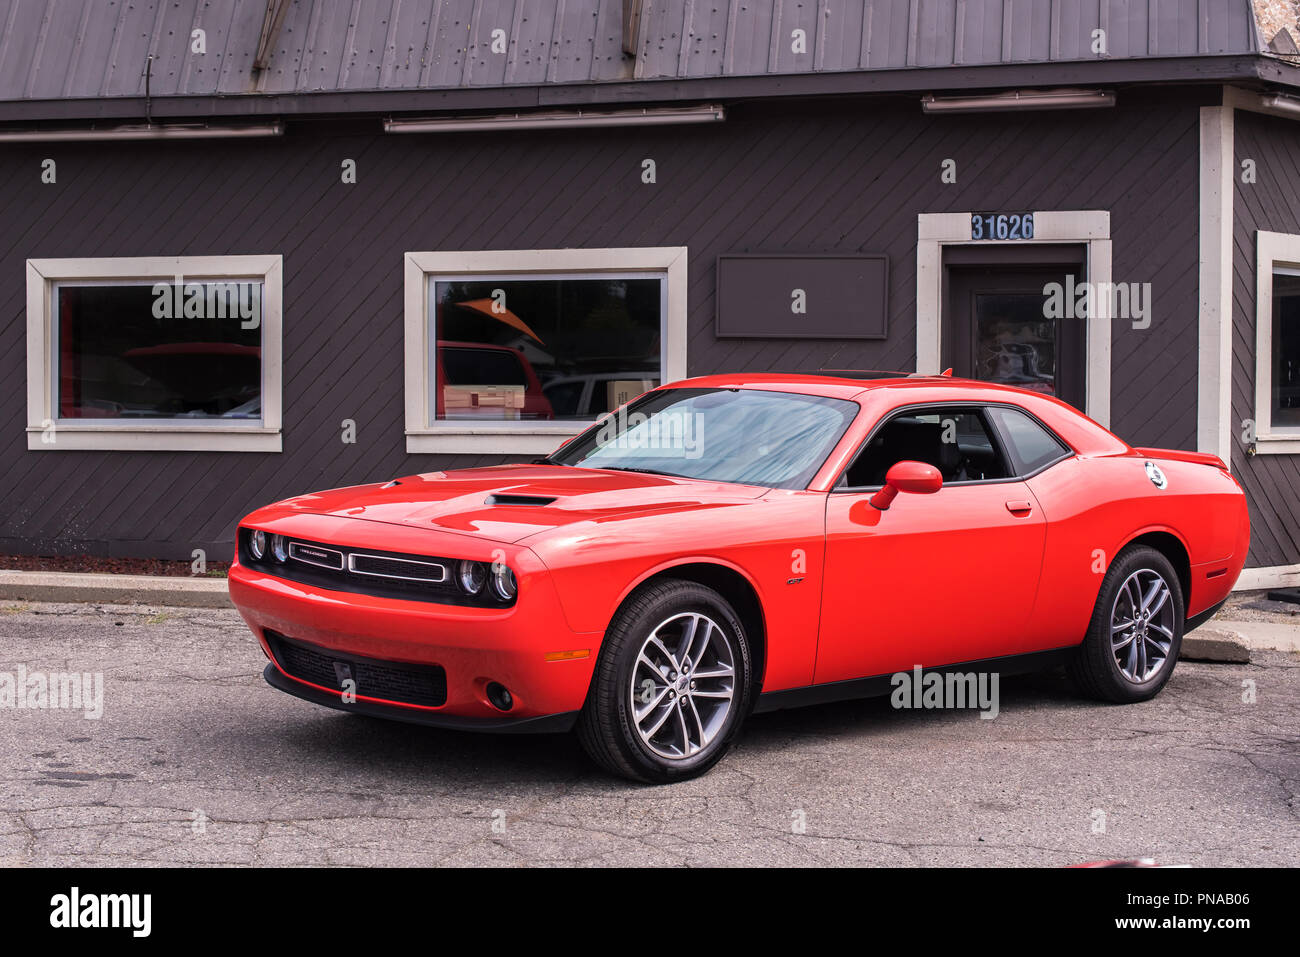 ROYAL OAK, MI/USA - AUGUST 16, 2018: A Dodge Challenger at the Woodward Dream Cruise, the world's largest one-day automotive event. Stock Photo